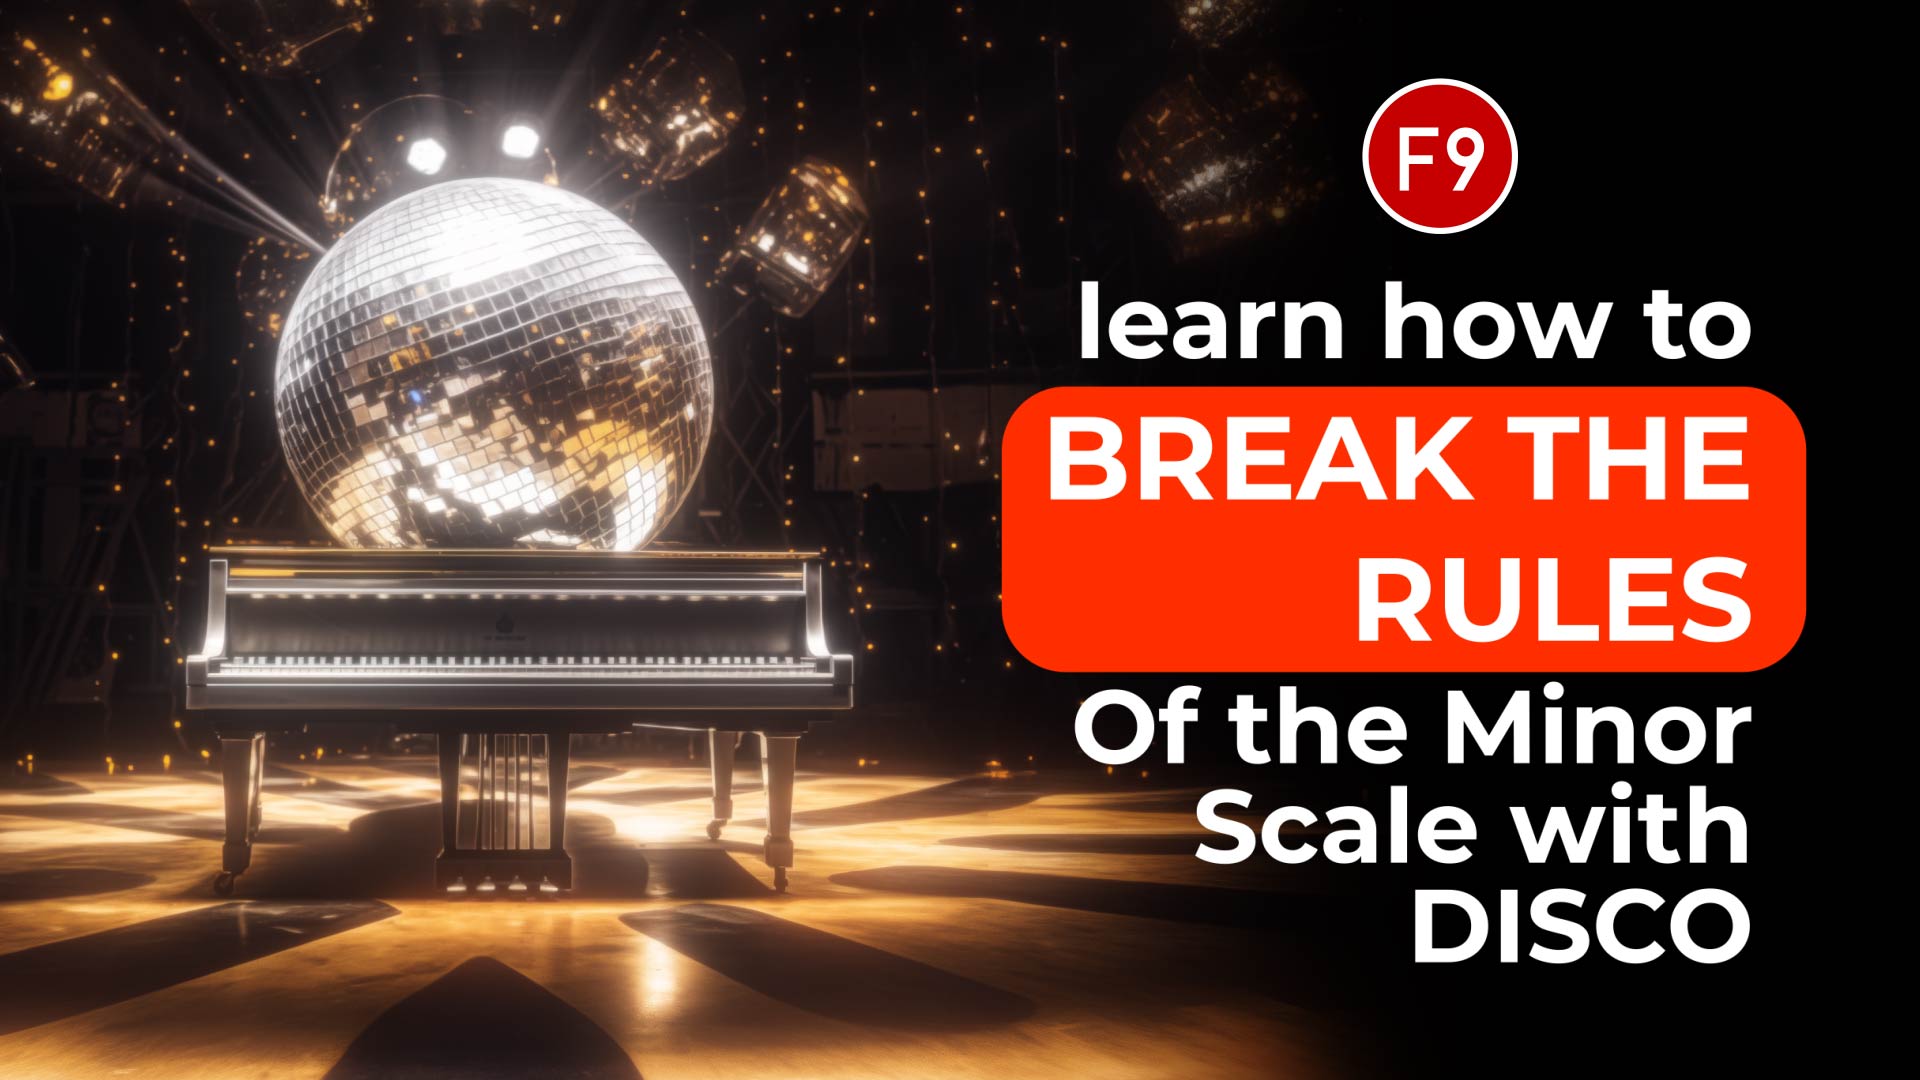 Use Disco to learn how to break the rules of the minor scale.